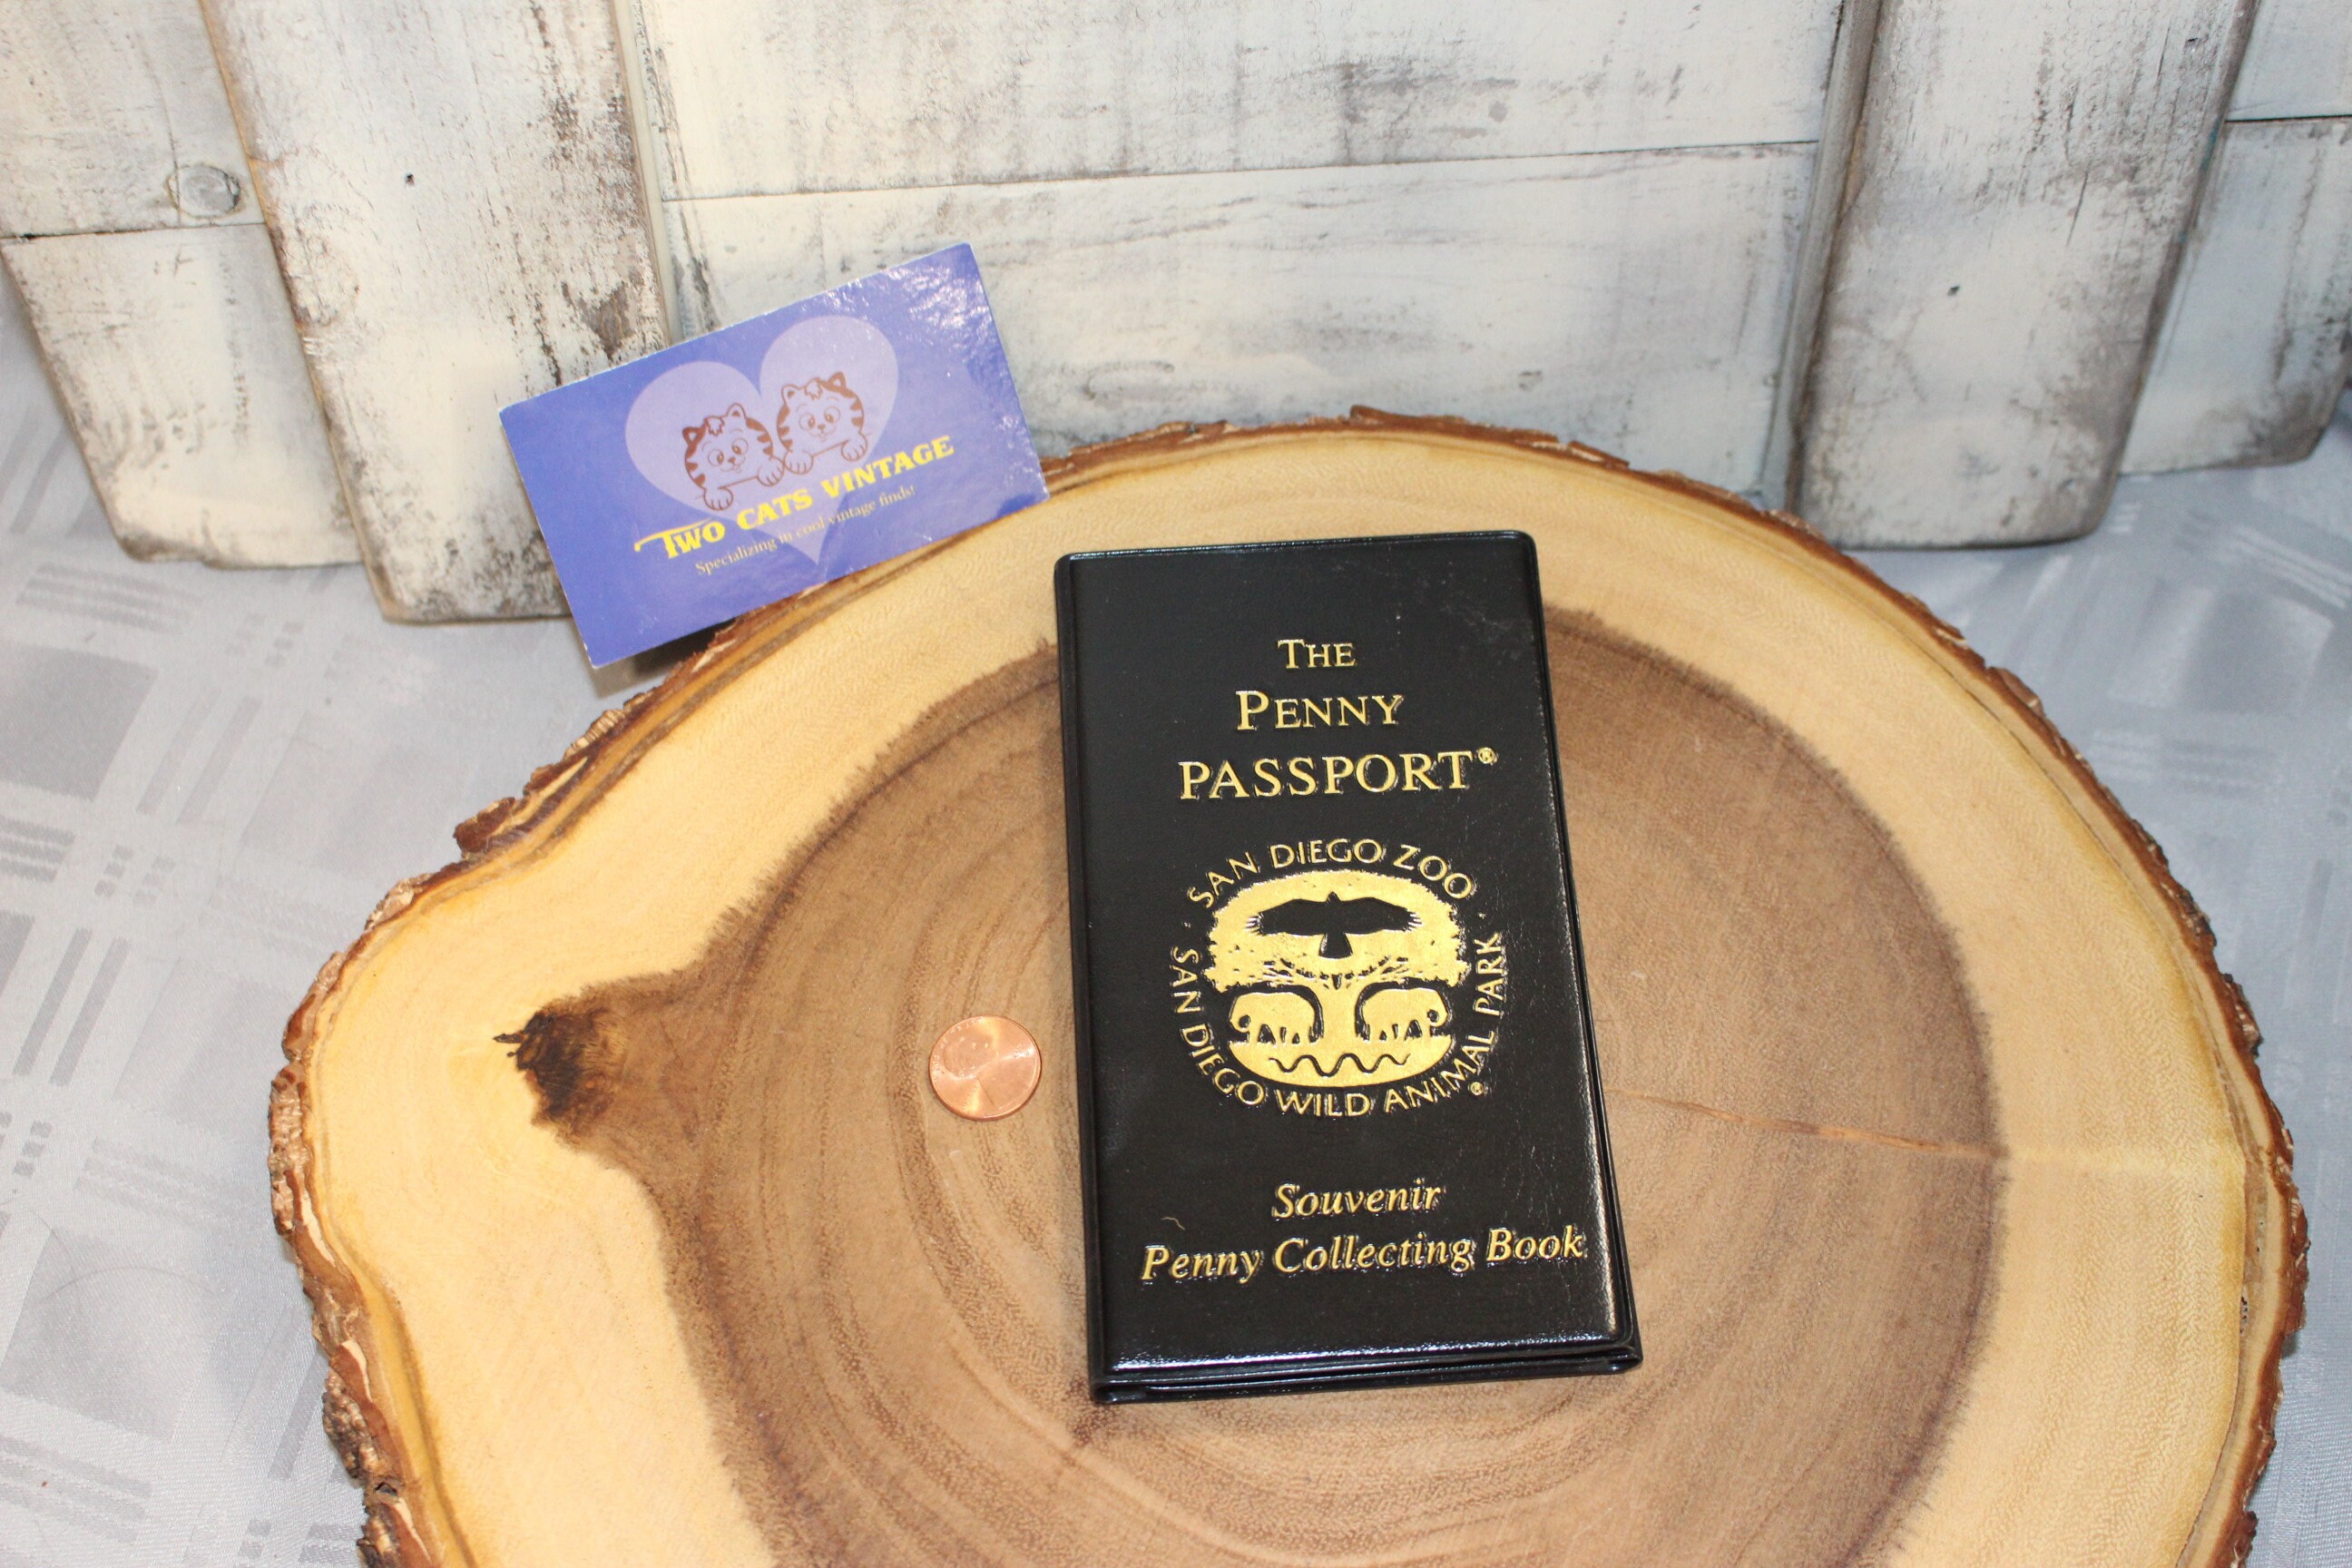  Penny Passport Souvenir Penny Collecting Book for